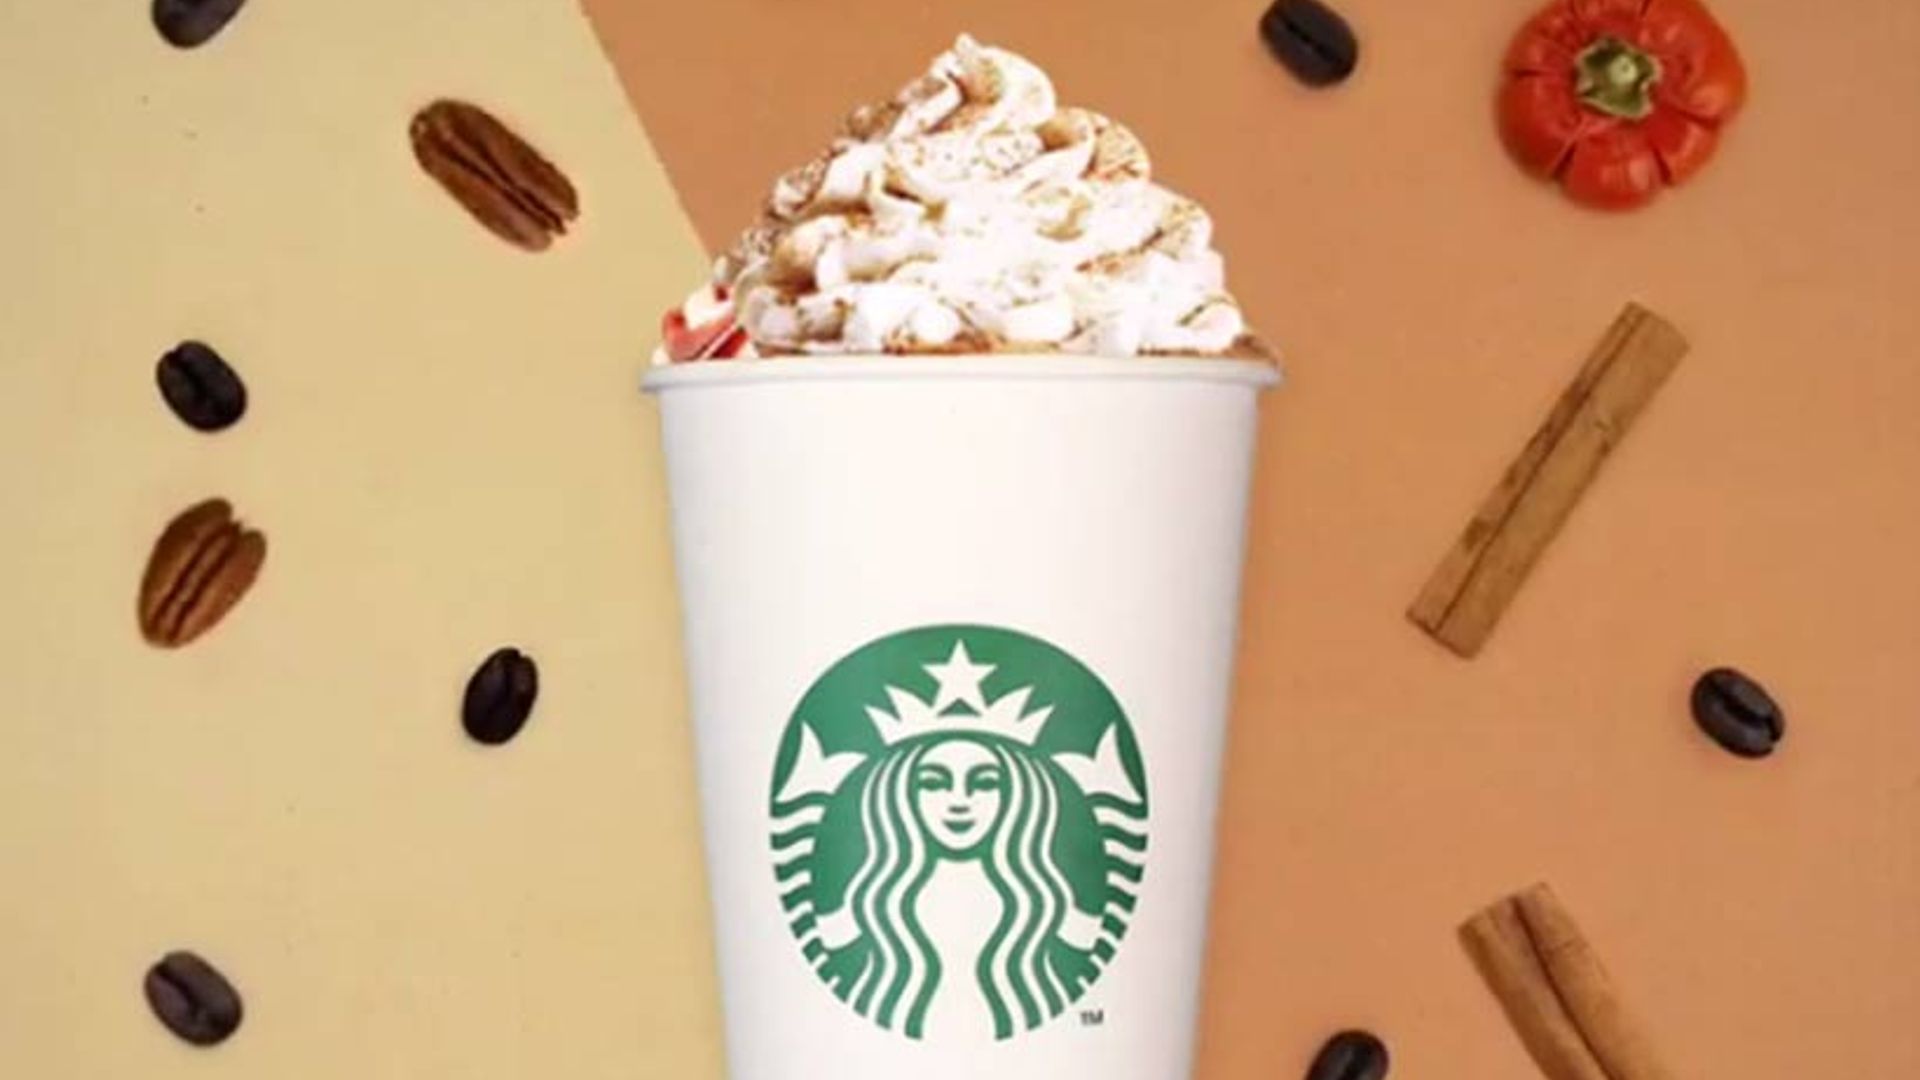 It's official! Starbucks' Pumpkin Spice Lattes are back